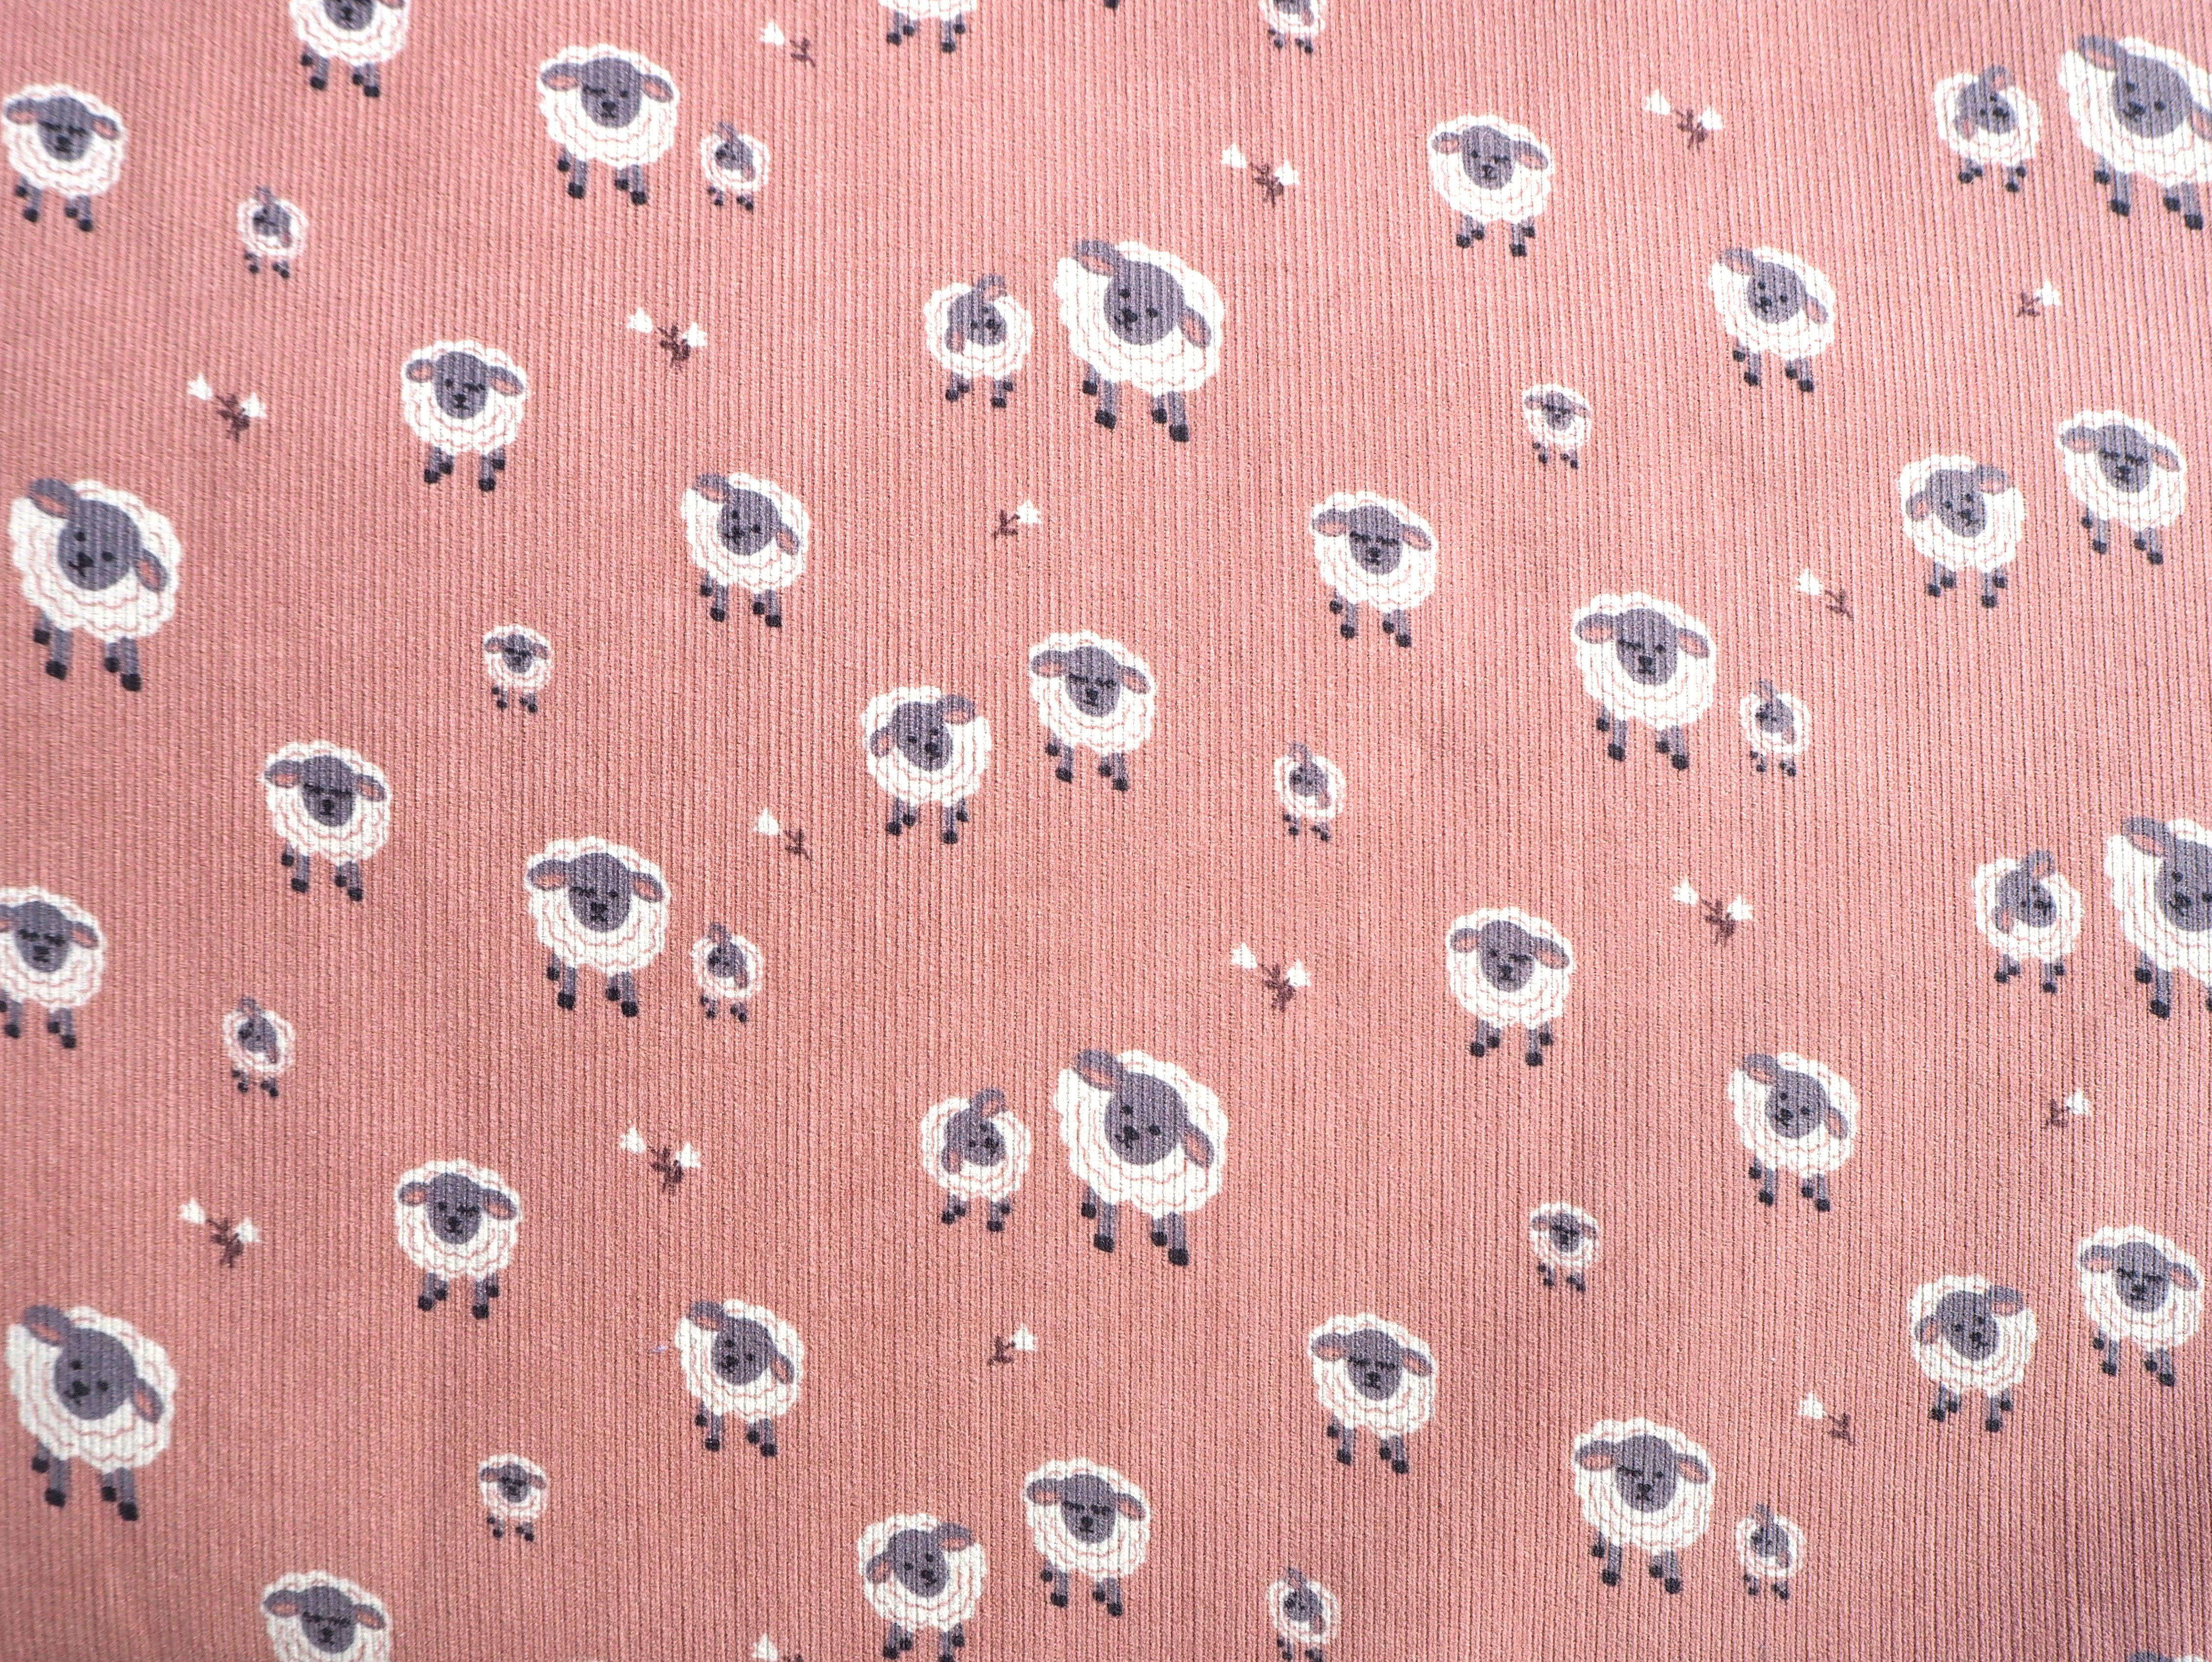 Cute Sheep images on pale pink corduroy fabric